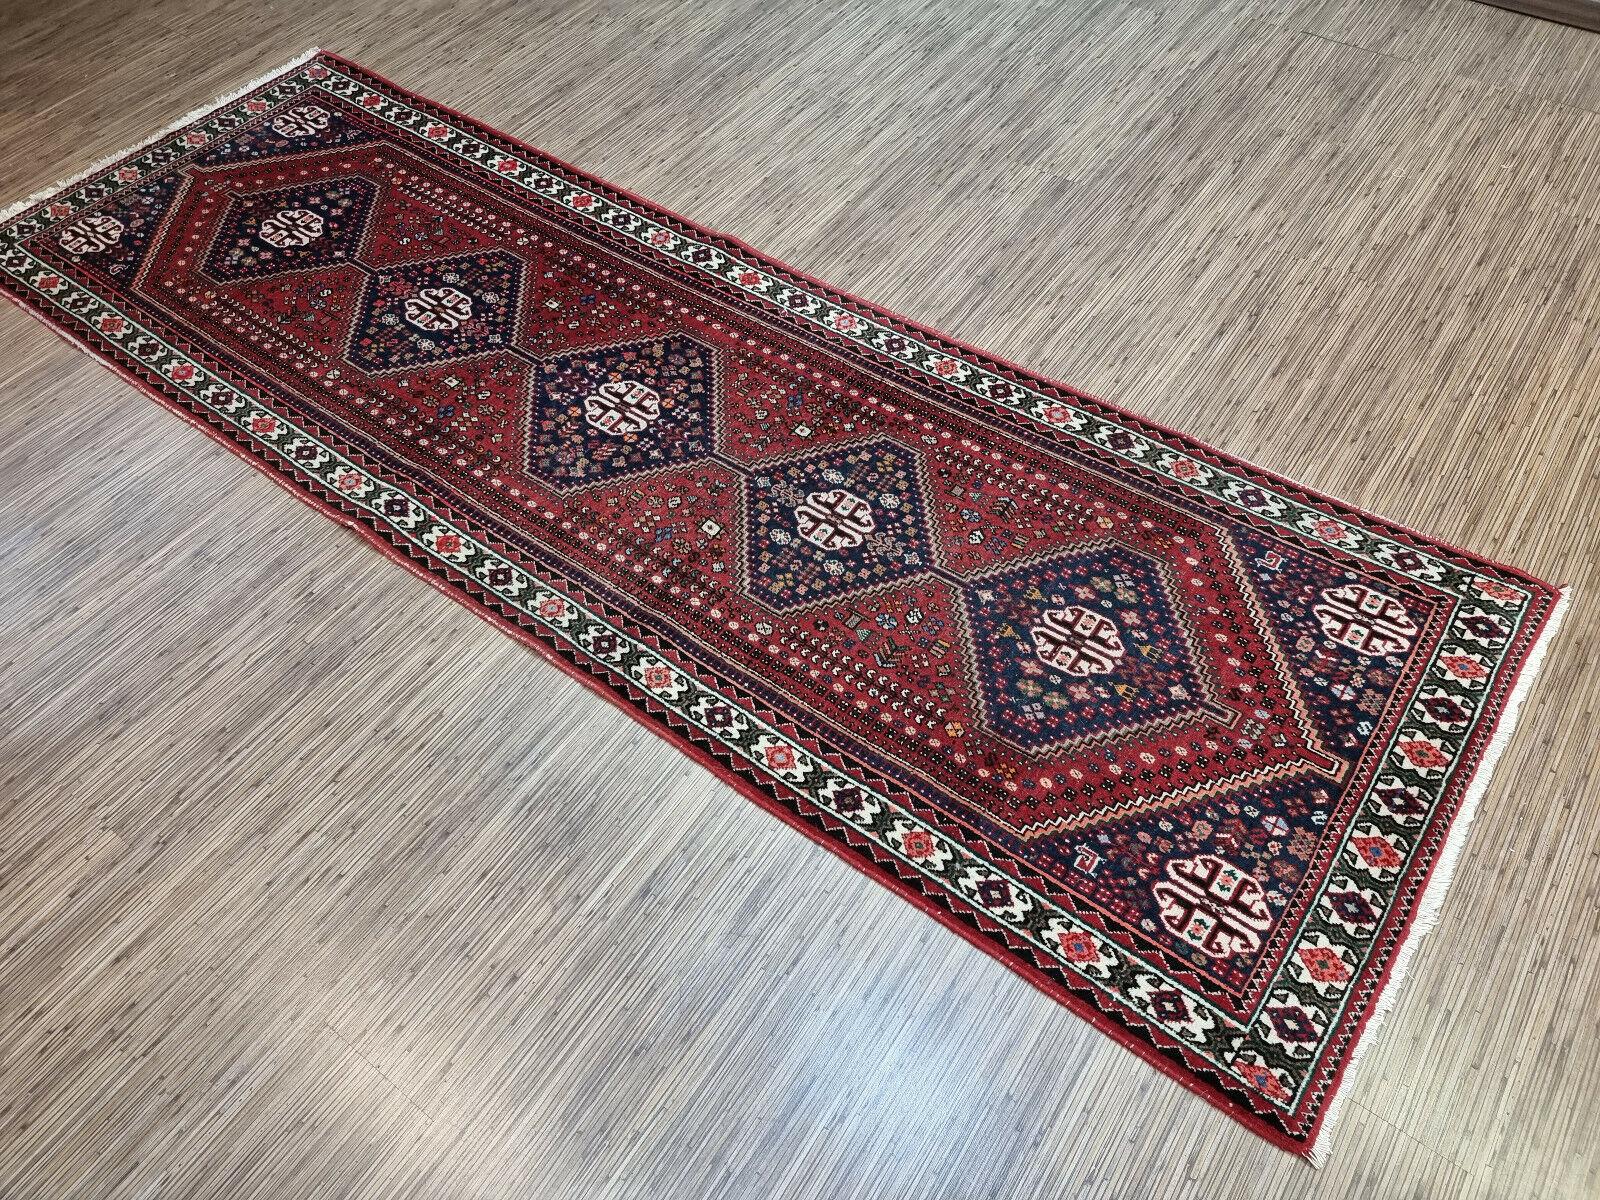 Enhance your home with our Handmade Vintage Persian Style Shiraz Rug, a magnificent piece of art and history. This rug was made in the 1960s, measuring 3.1’ x 9.2’, ideal for long and narrow spaces.

The rug features a stunning design, with four